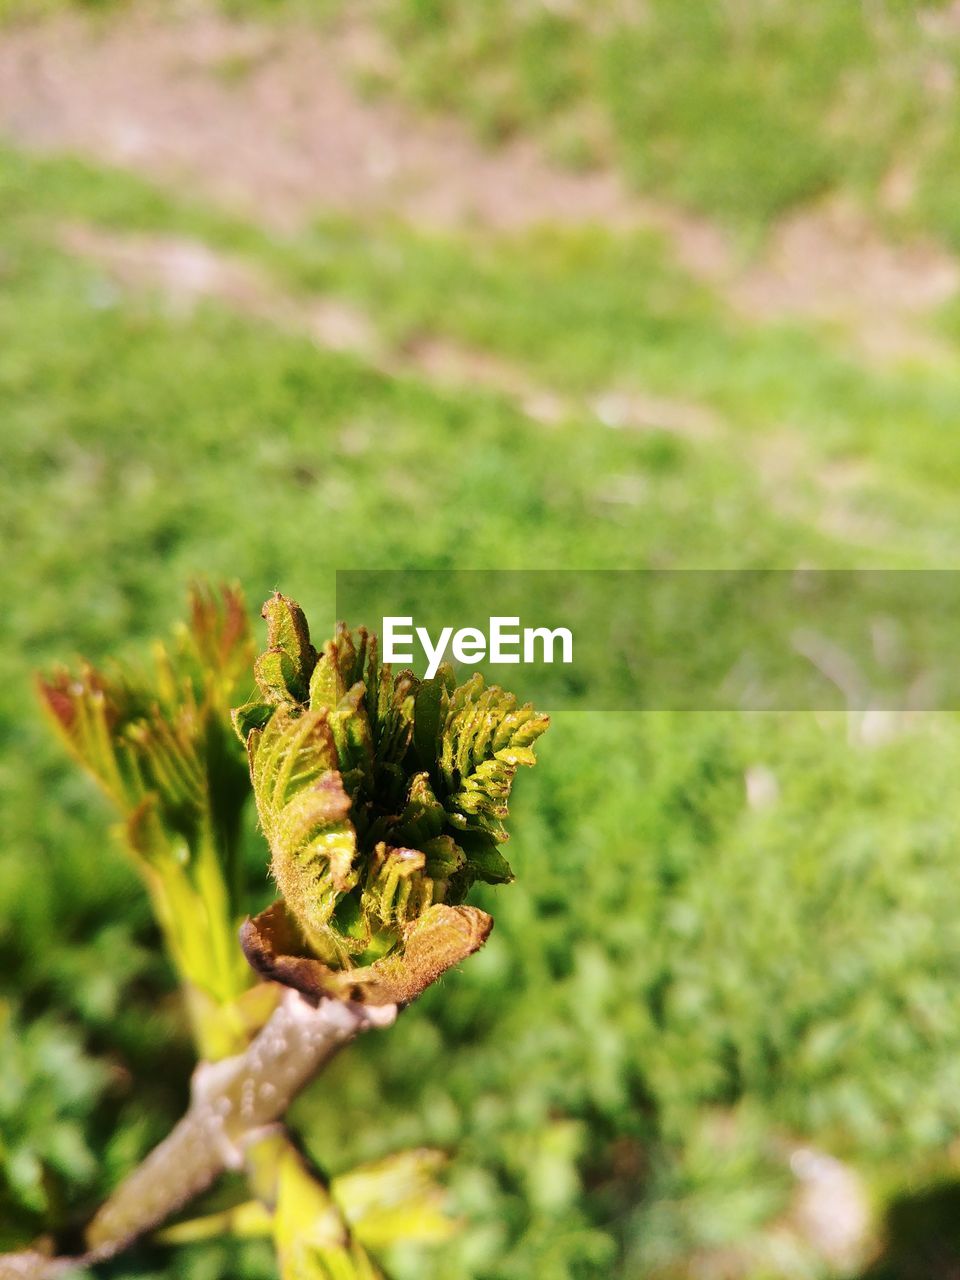 CLOSE-UP OF FLOWERING PLANT ON LAND AGAINST BLURRED BACKGROUND